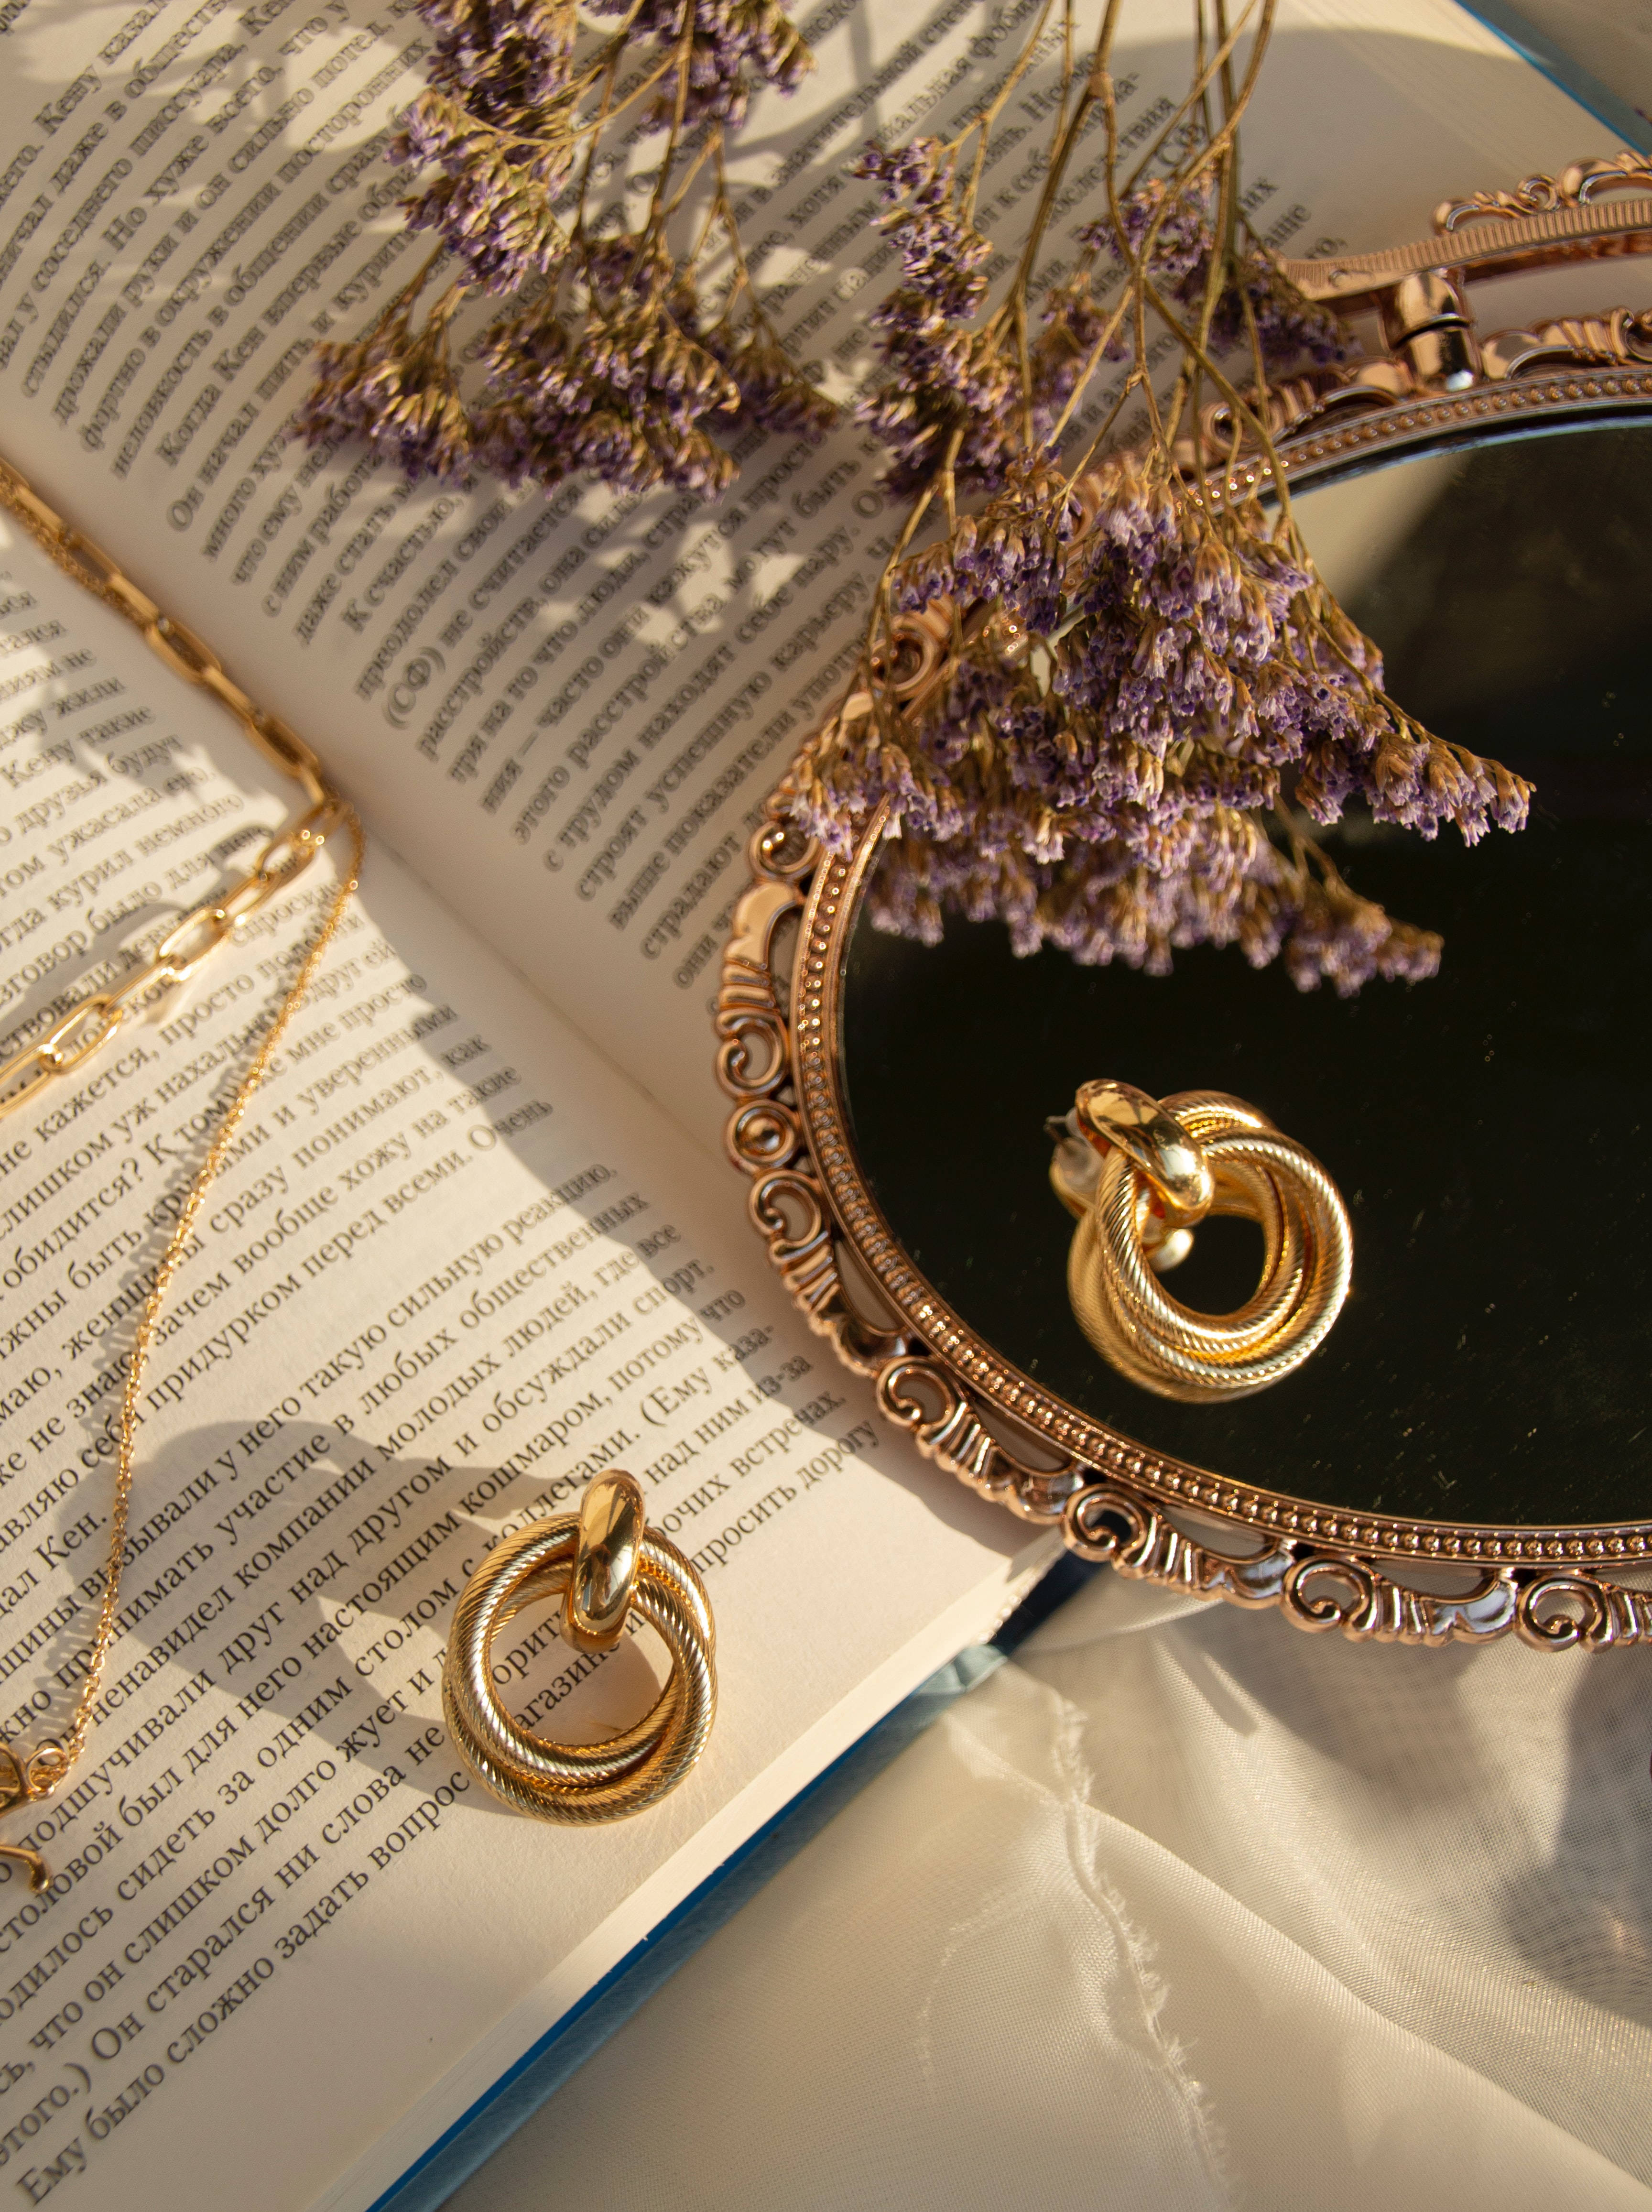 A pair of earrings and necklace on top an open book - Bling, gold